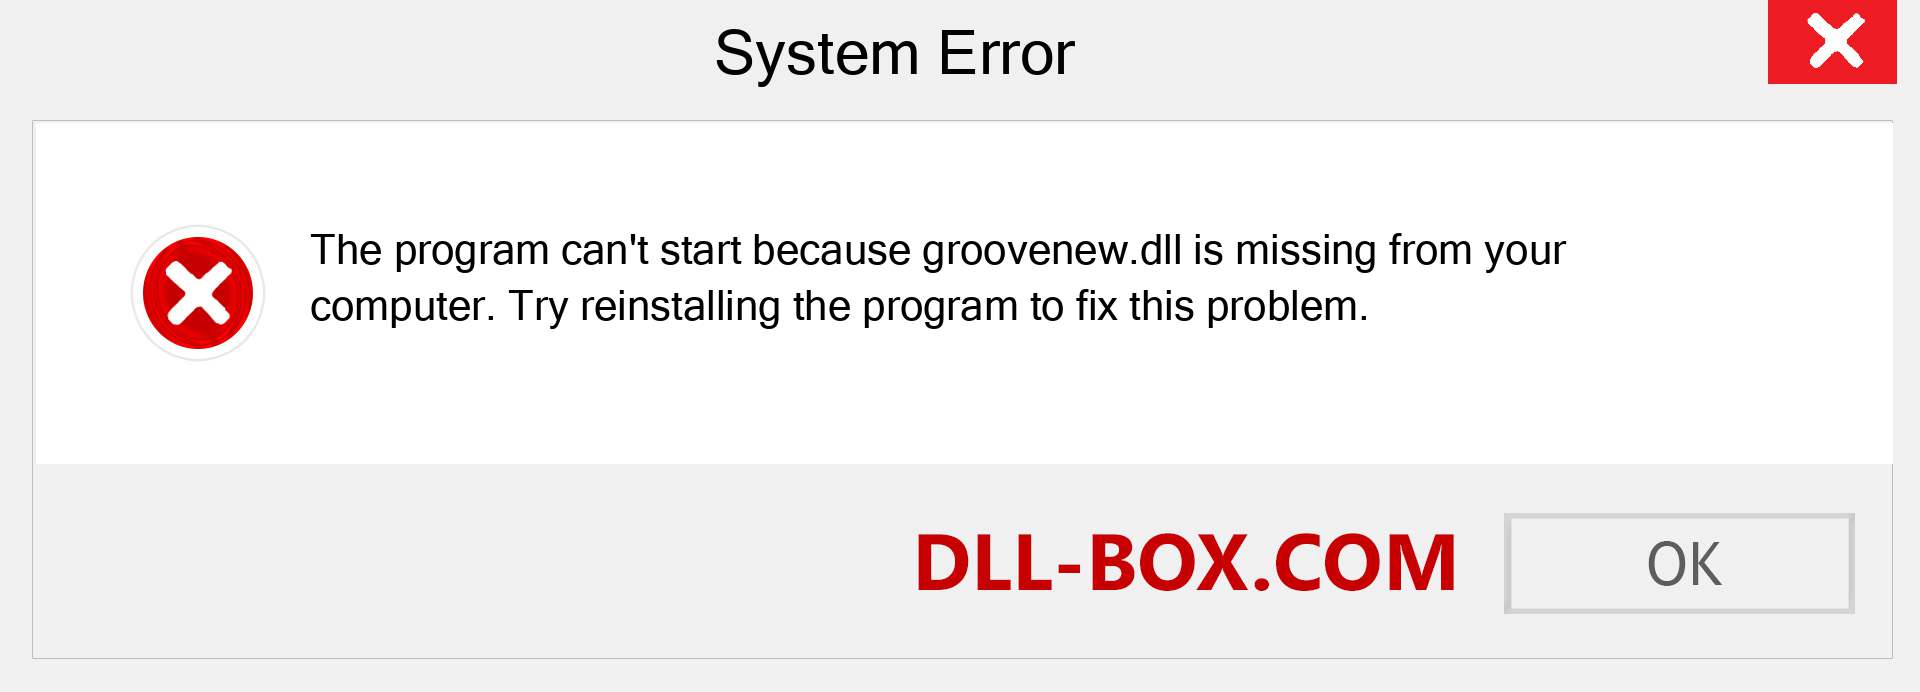  groovenew.dll file is missing?. Download for Windows 7, 8, 10 - Fix  groovenew dll Missing Error on Windows, photos, images